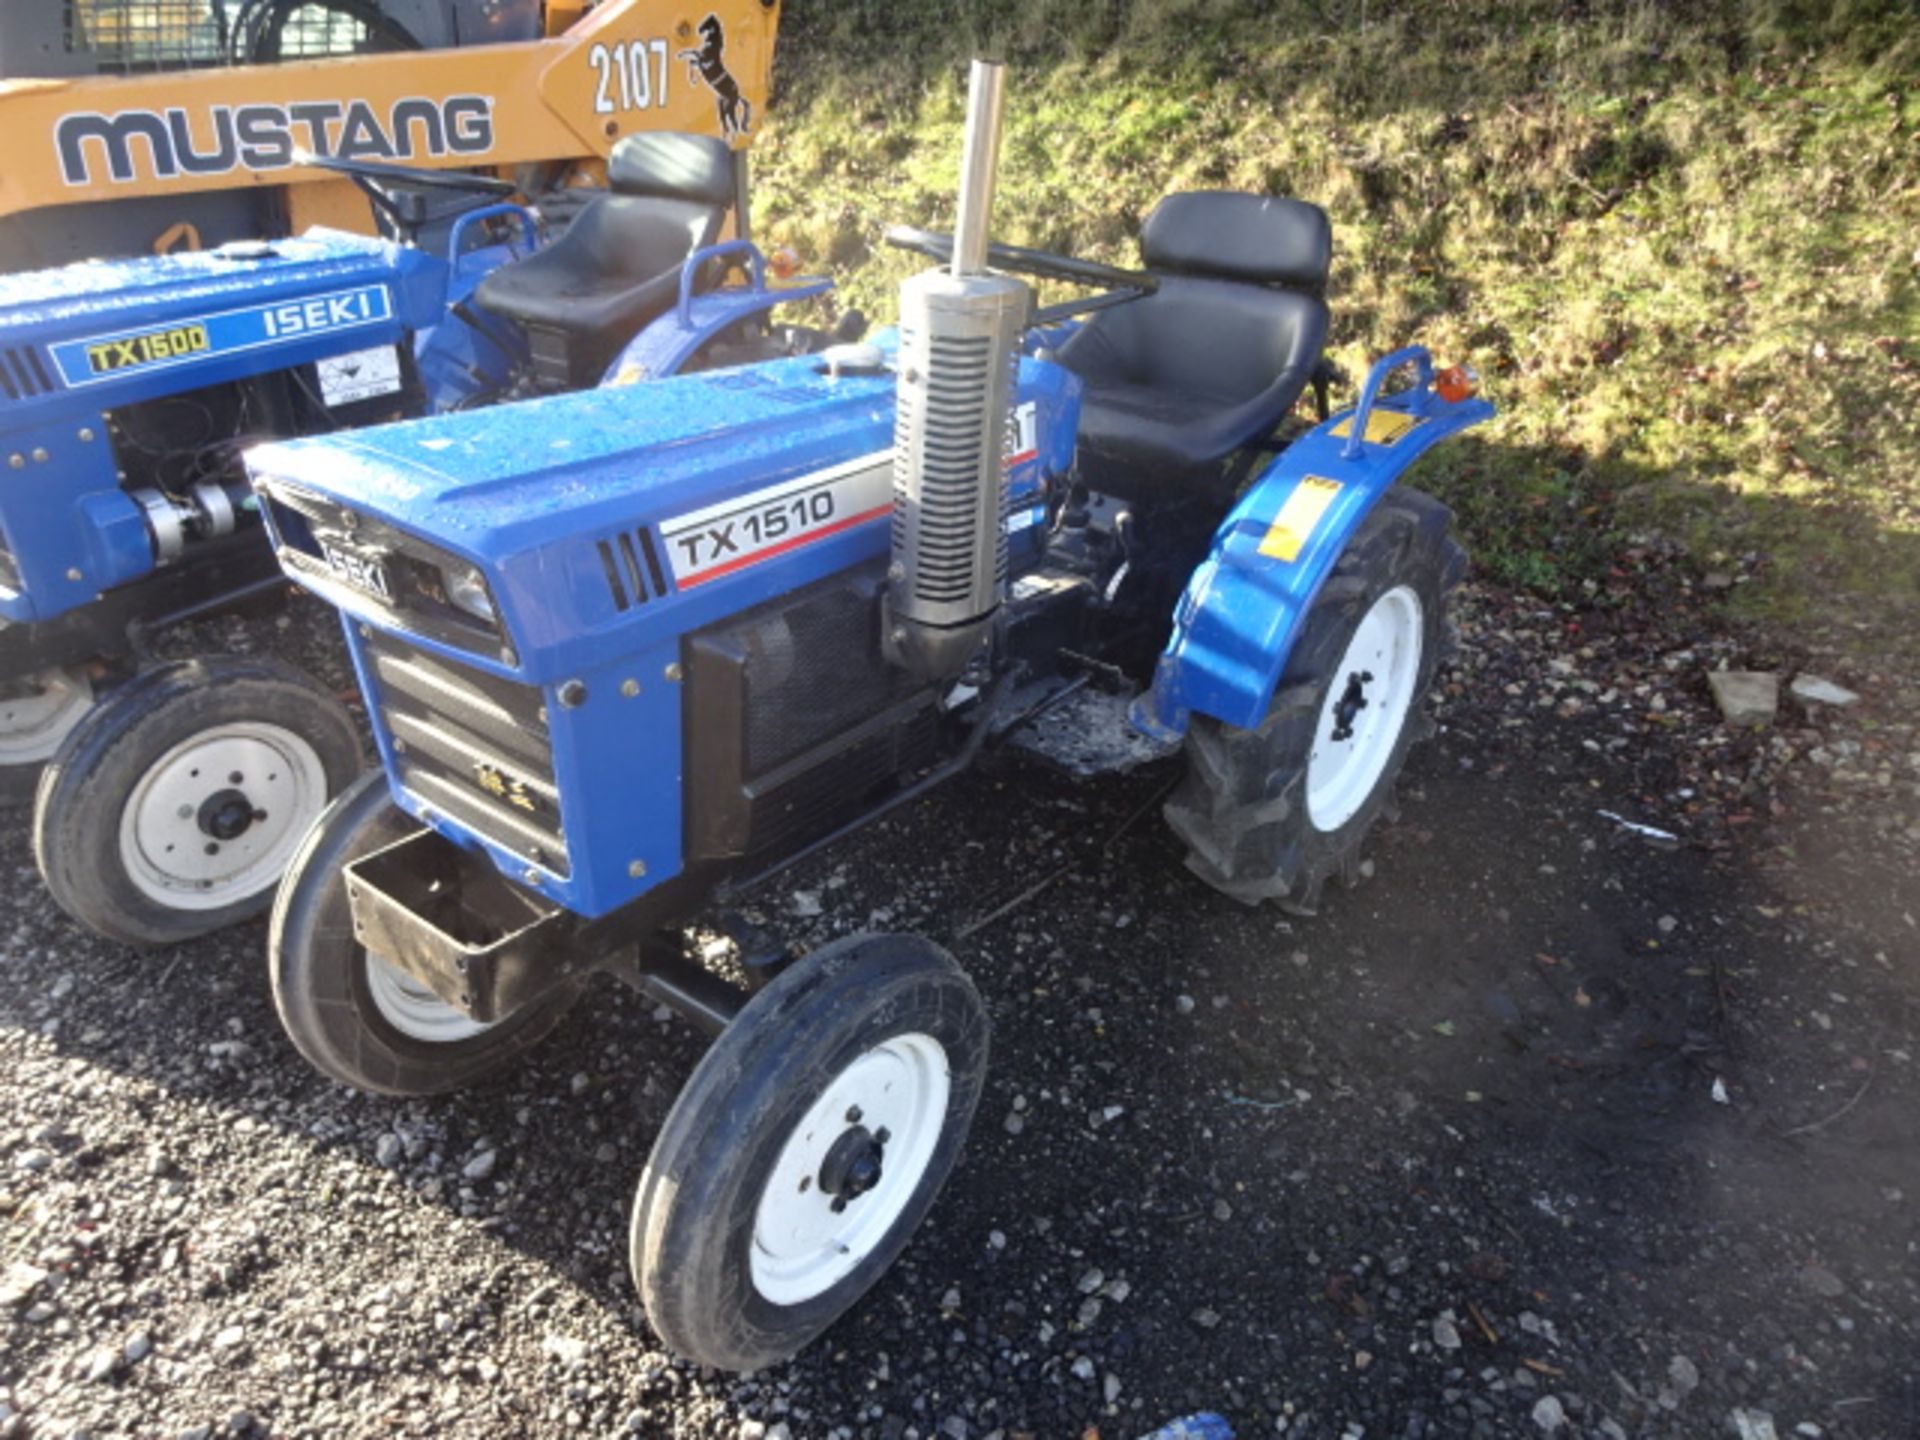 ISEKI TX1510 3-cylinder 2wd compact tractor, 535 hours c/w 3-point linkage & pto (R&D) - Image 2 of 4